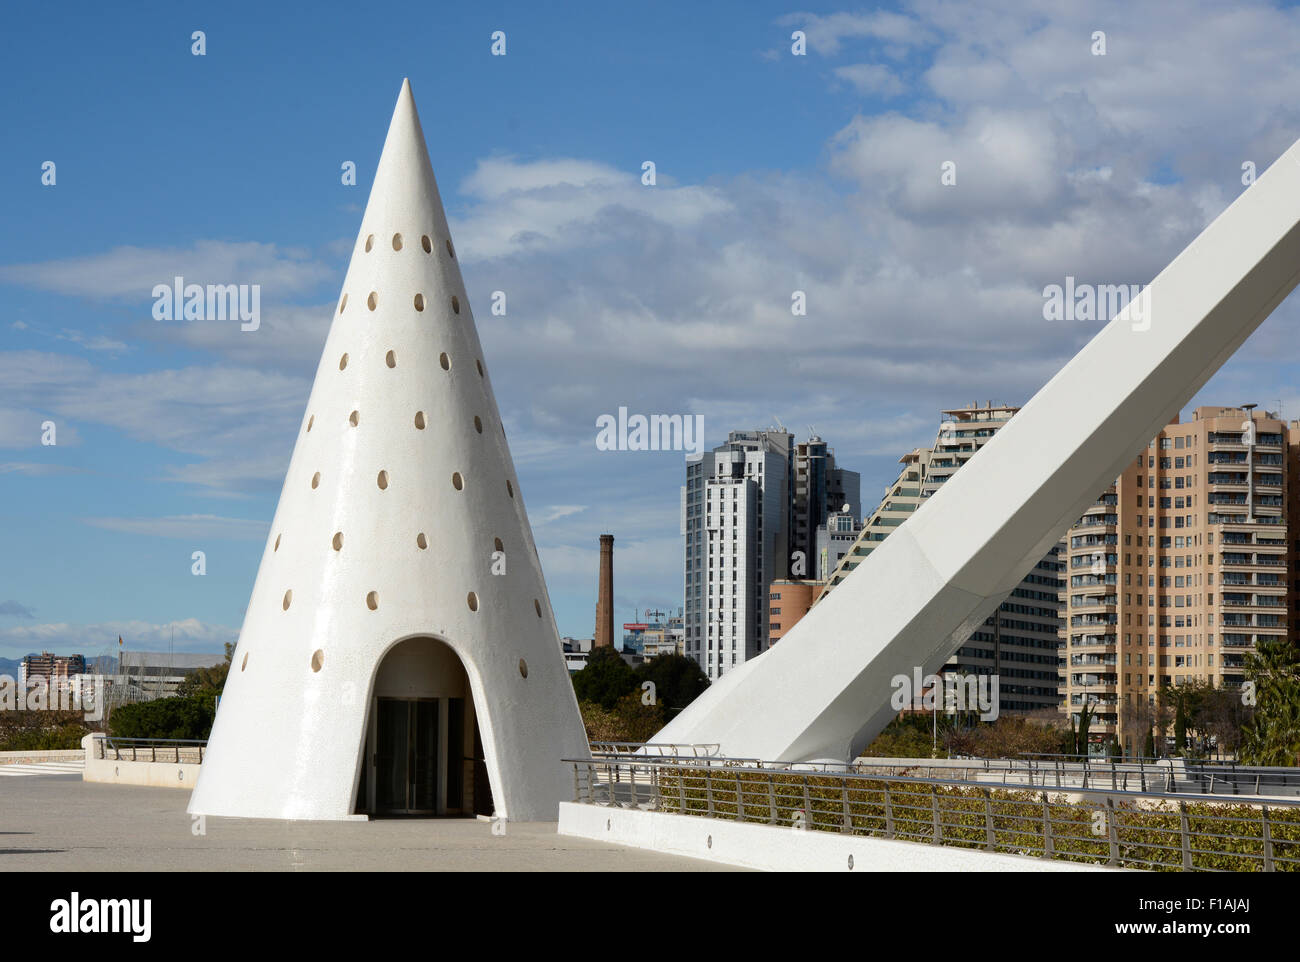 Modern architecture and buildings in the City of Arts and Sciences. Valencia, Spain Stock Photo